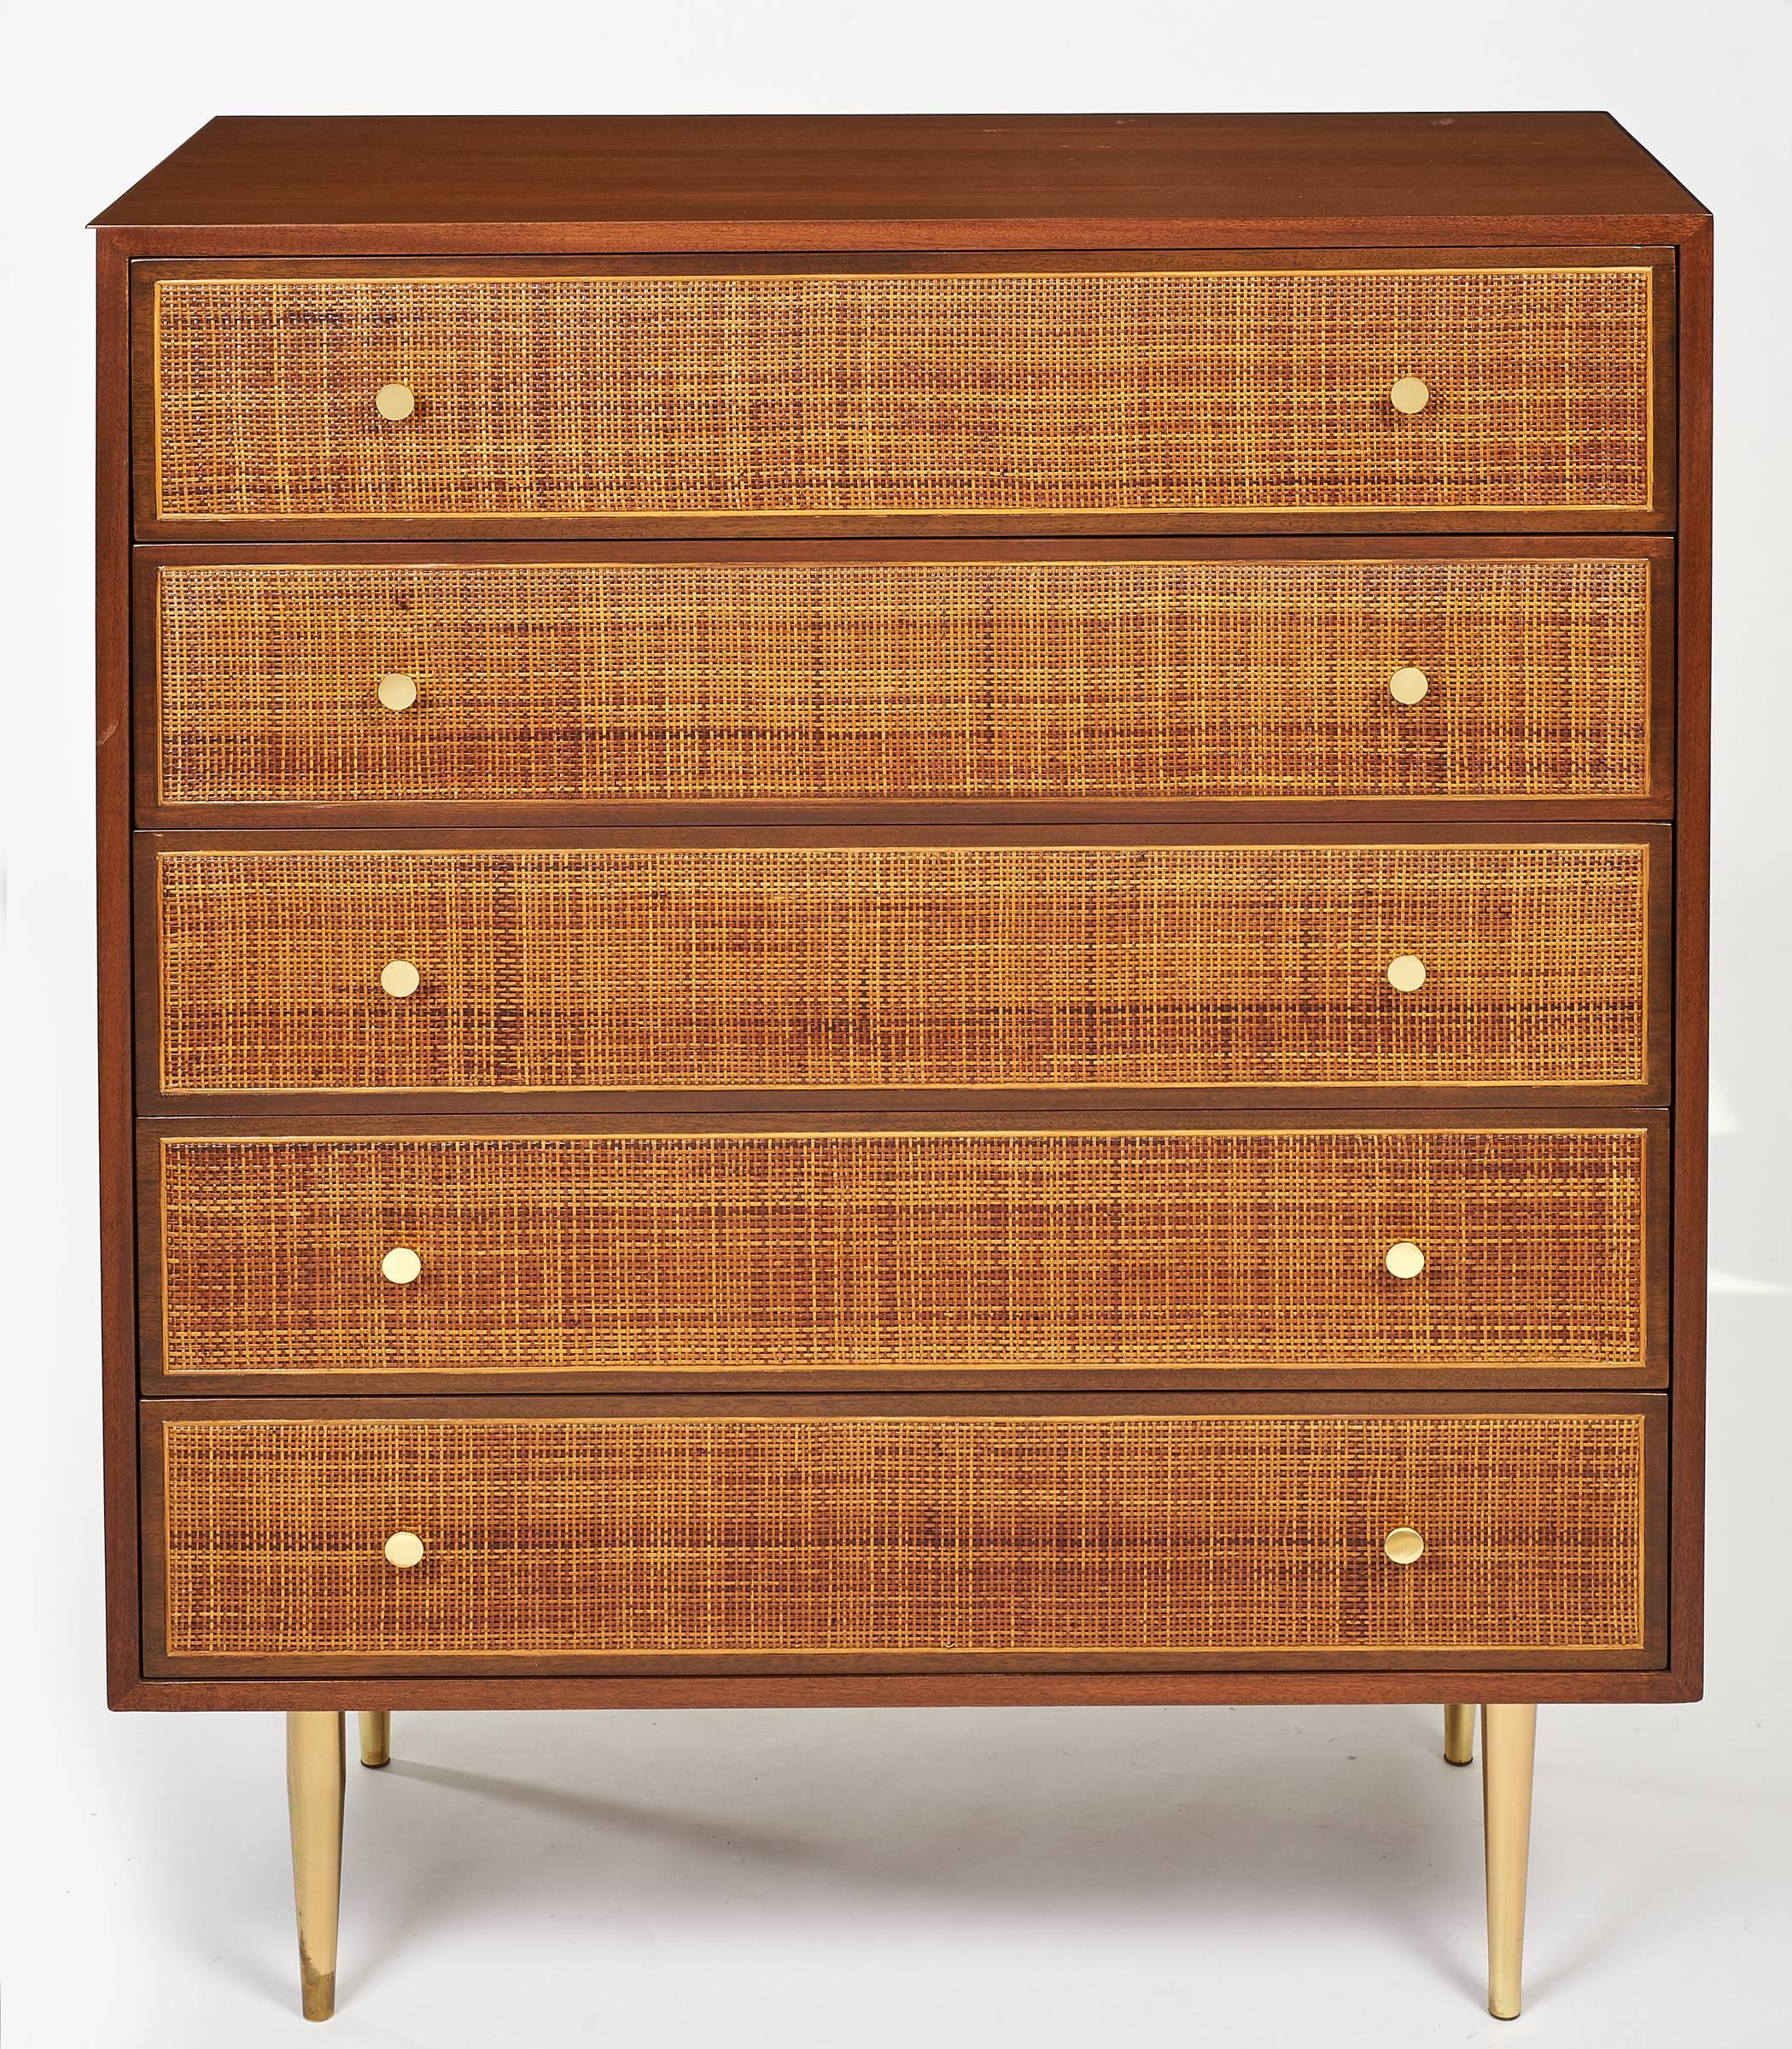 You are viewing an exceptional and classy 1950s gentleman's chest. The piece was acquired from a Westchester, NY estate. The woven/cane front, brass pulls, legs and the wood grain are in great condition. The finish on the outside as well as the